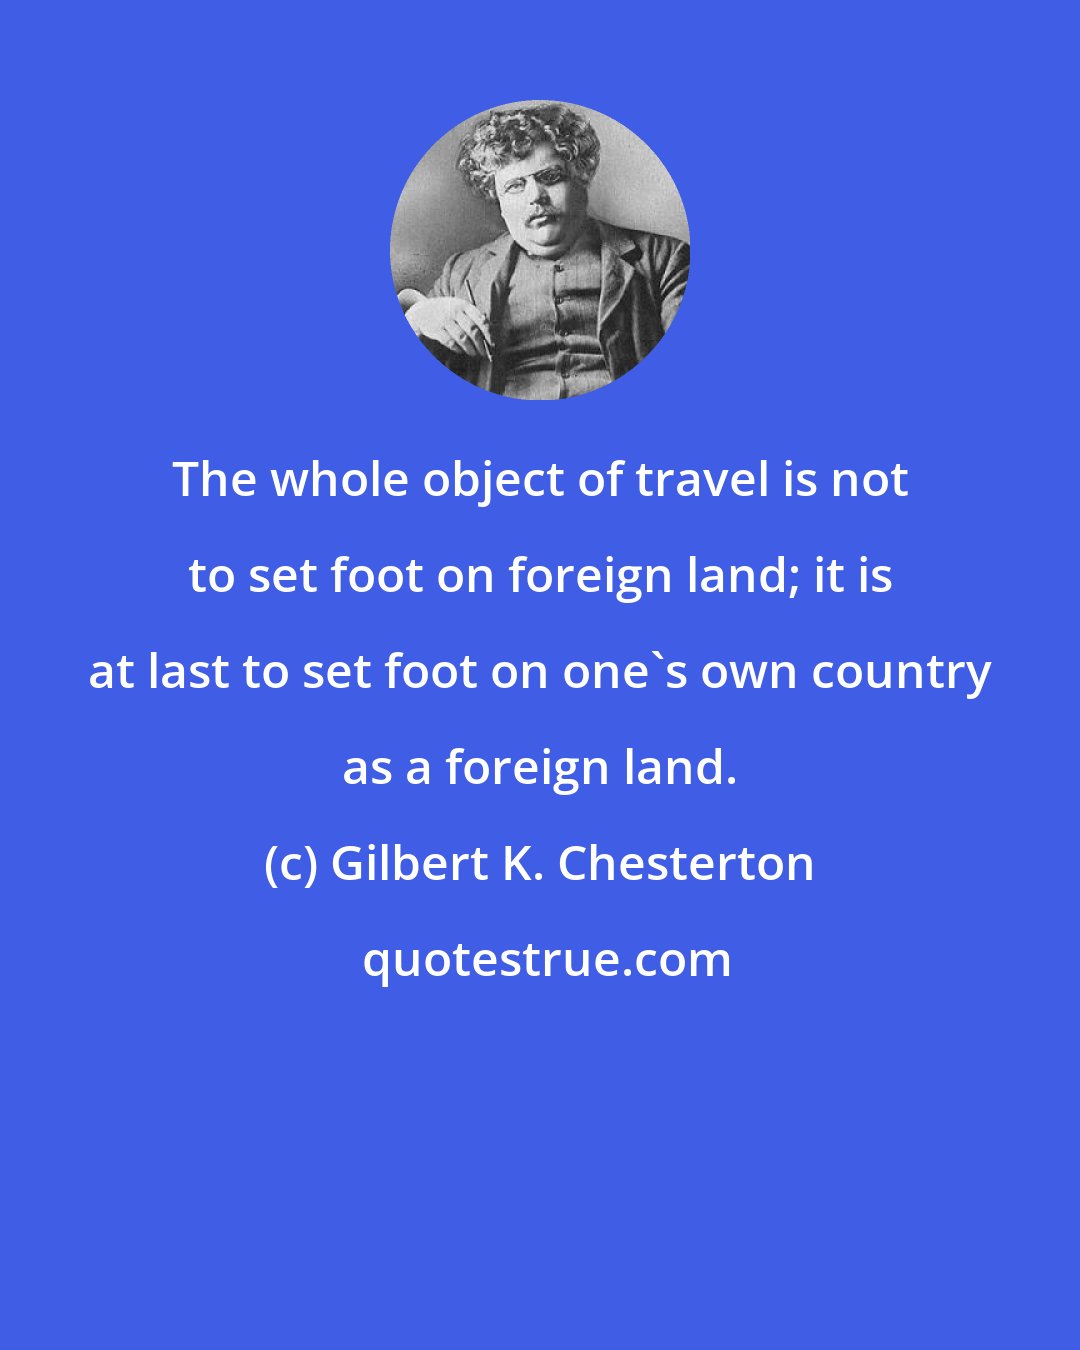 Gilbert K. Chesterton: The whole object of travel is not to set foot on foreign land; it is at last to set foot on one's own country as a foreign land.